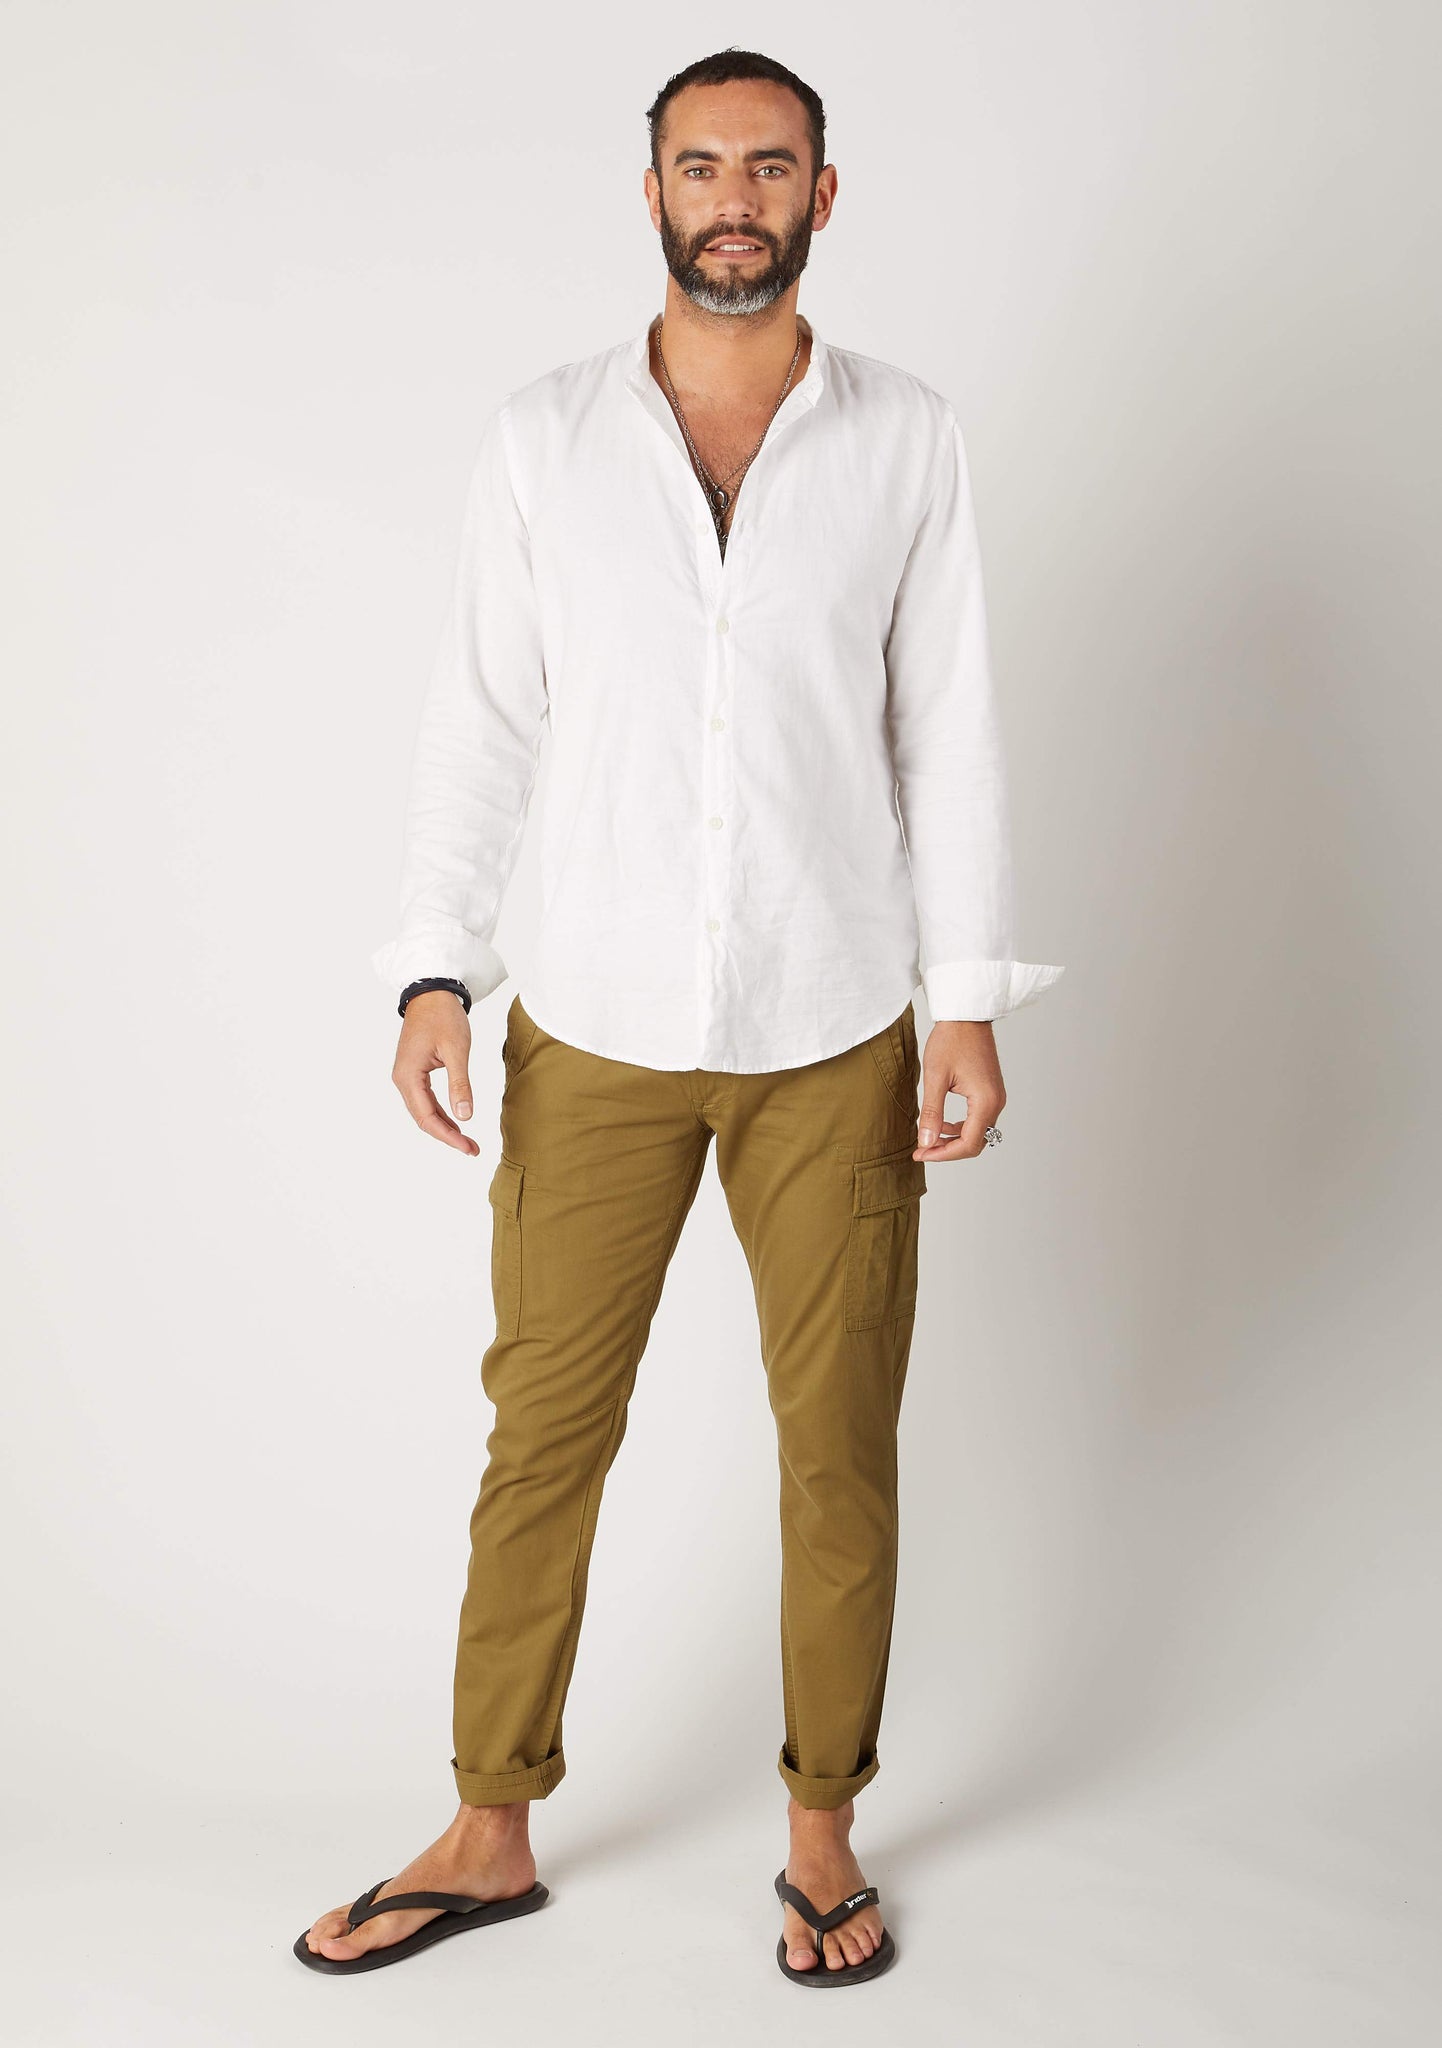 Full-length frontal pose wearing ‘Radcliffe’ style men’s olive organic cotton slim fit cargo trousers.